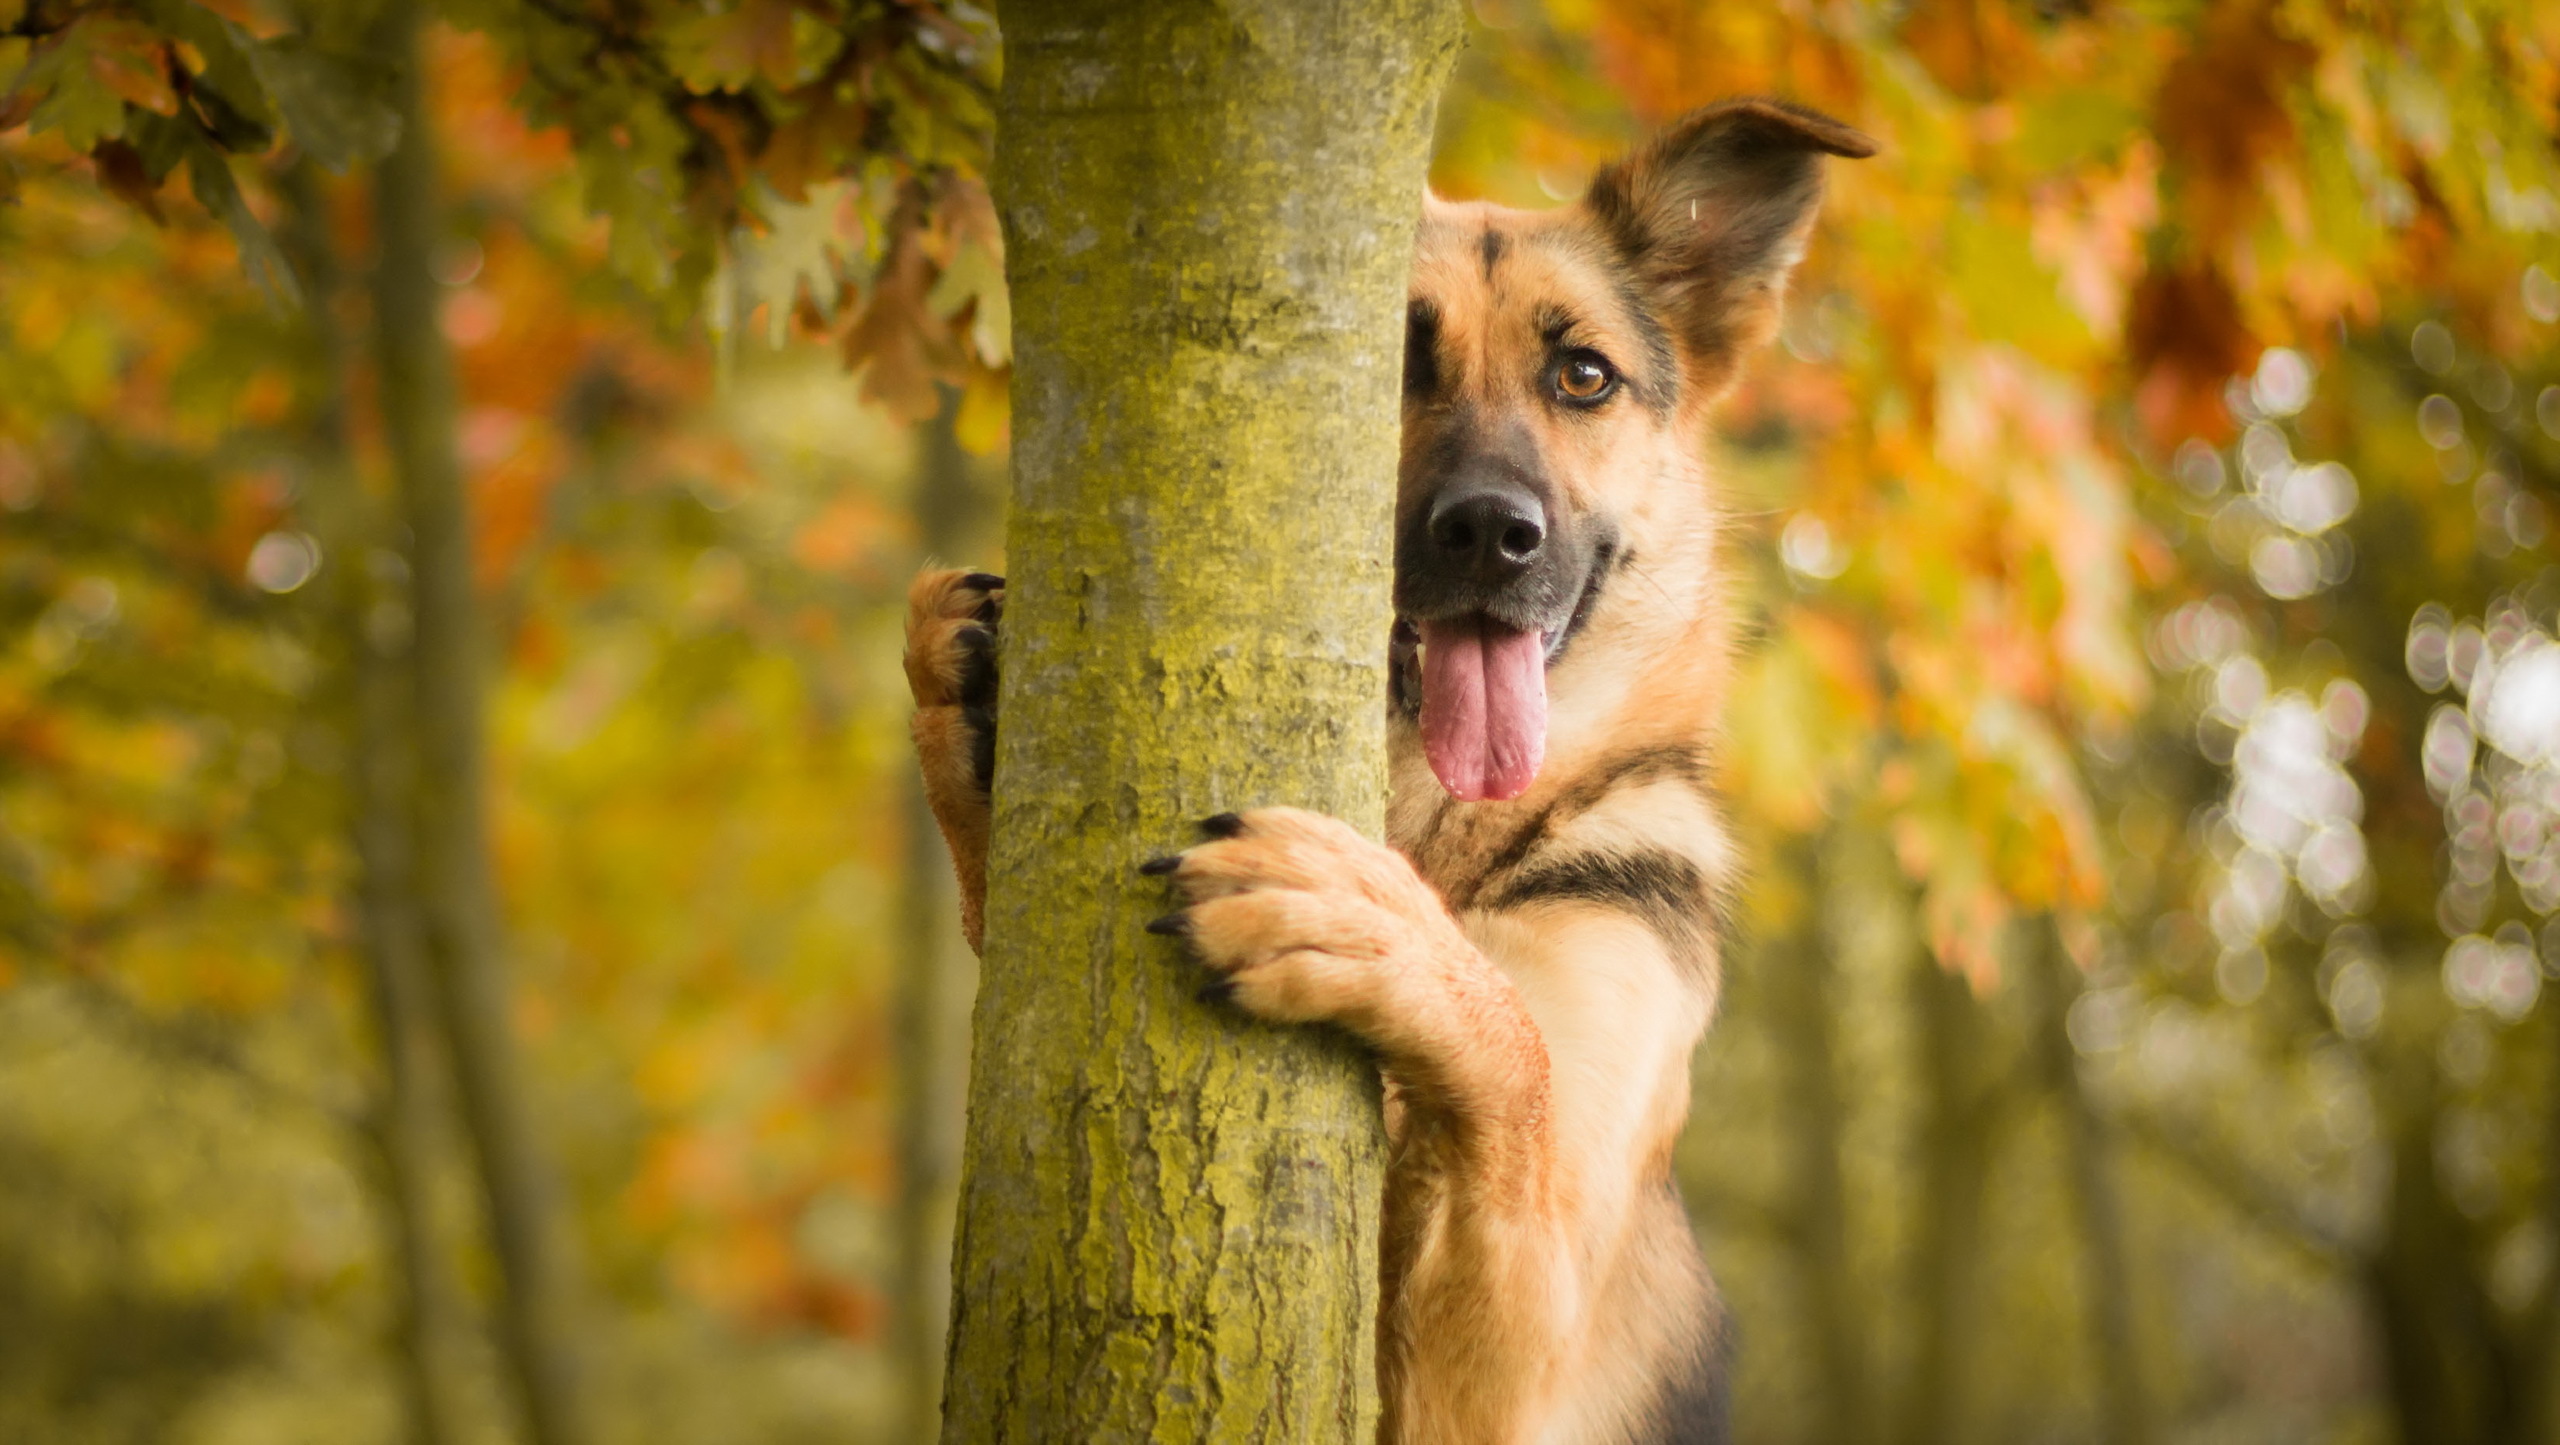 PC Wallpapers wood, animals, tree, dog, protruding tongue, tongue stuck out